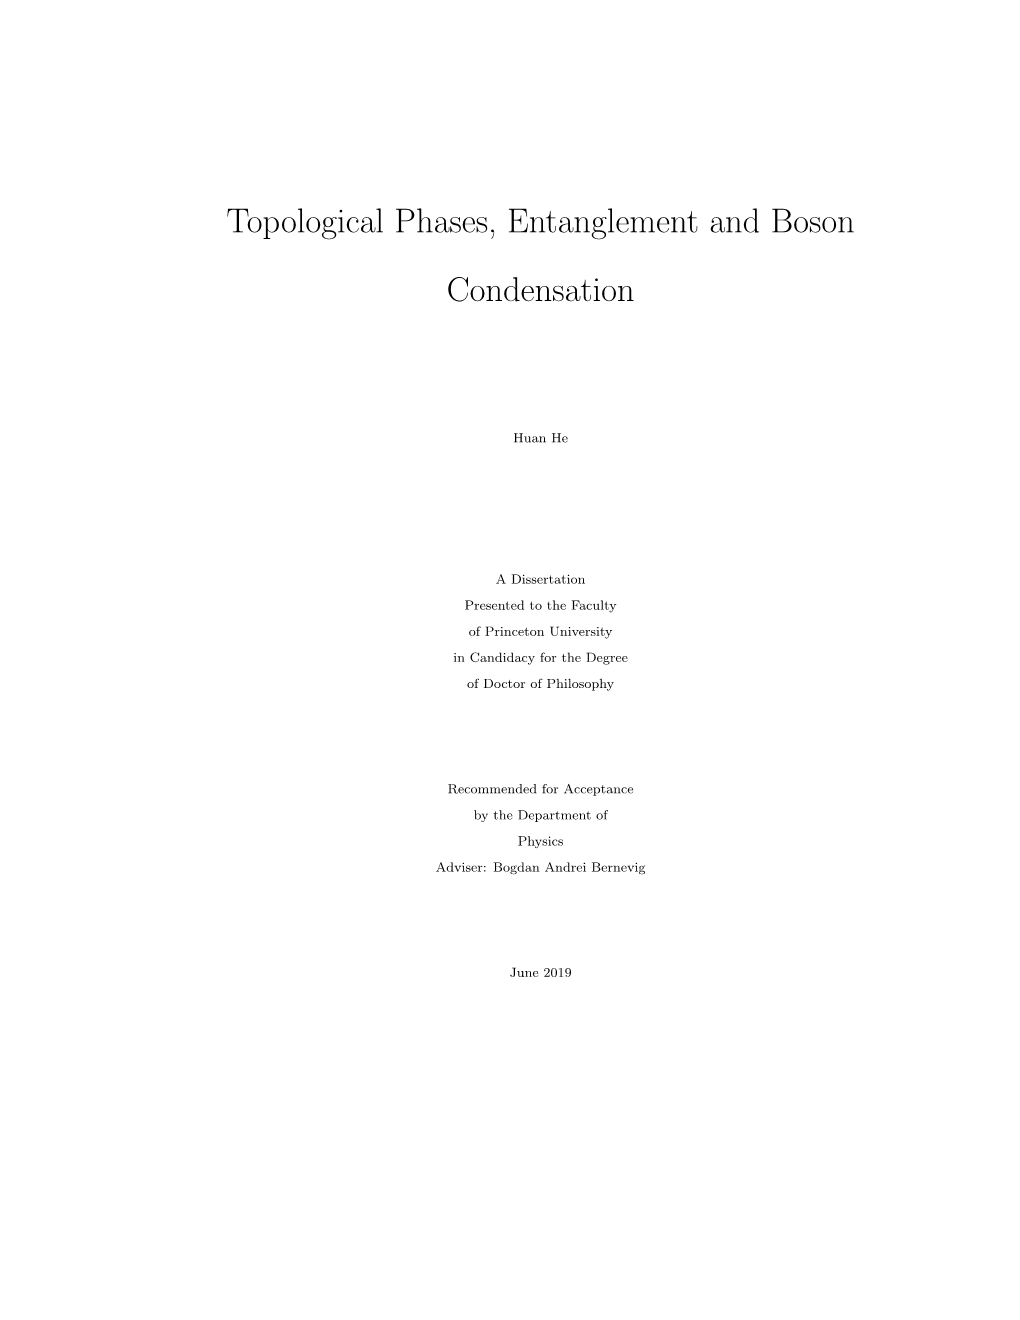 Topological Phases, Entanglement and Boson Condensation